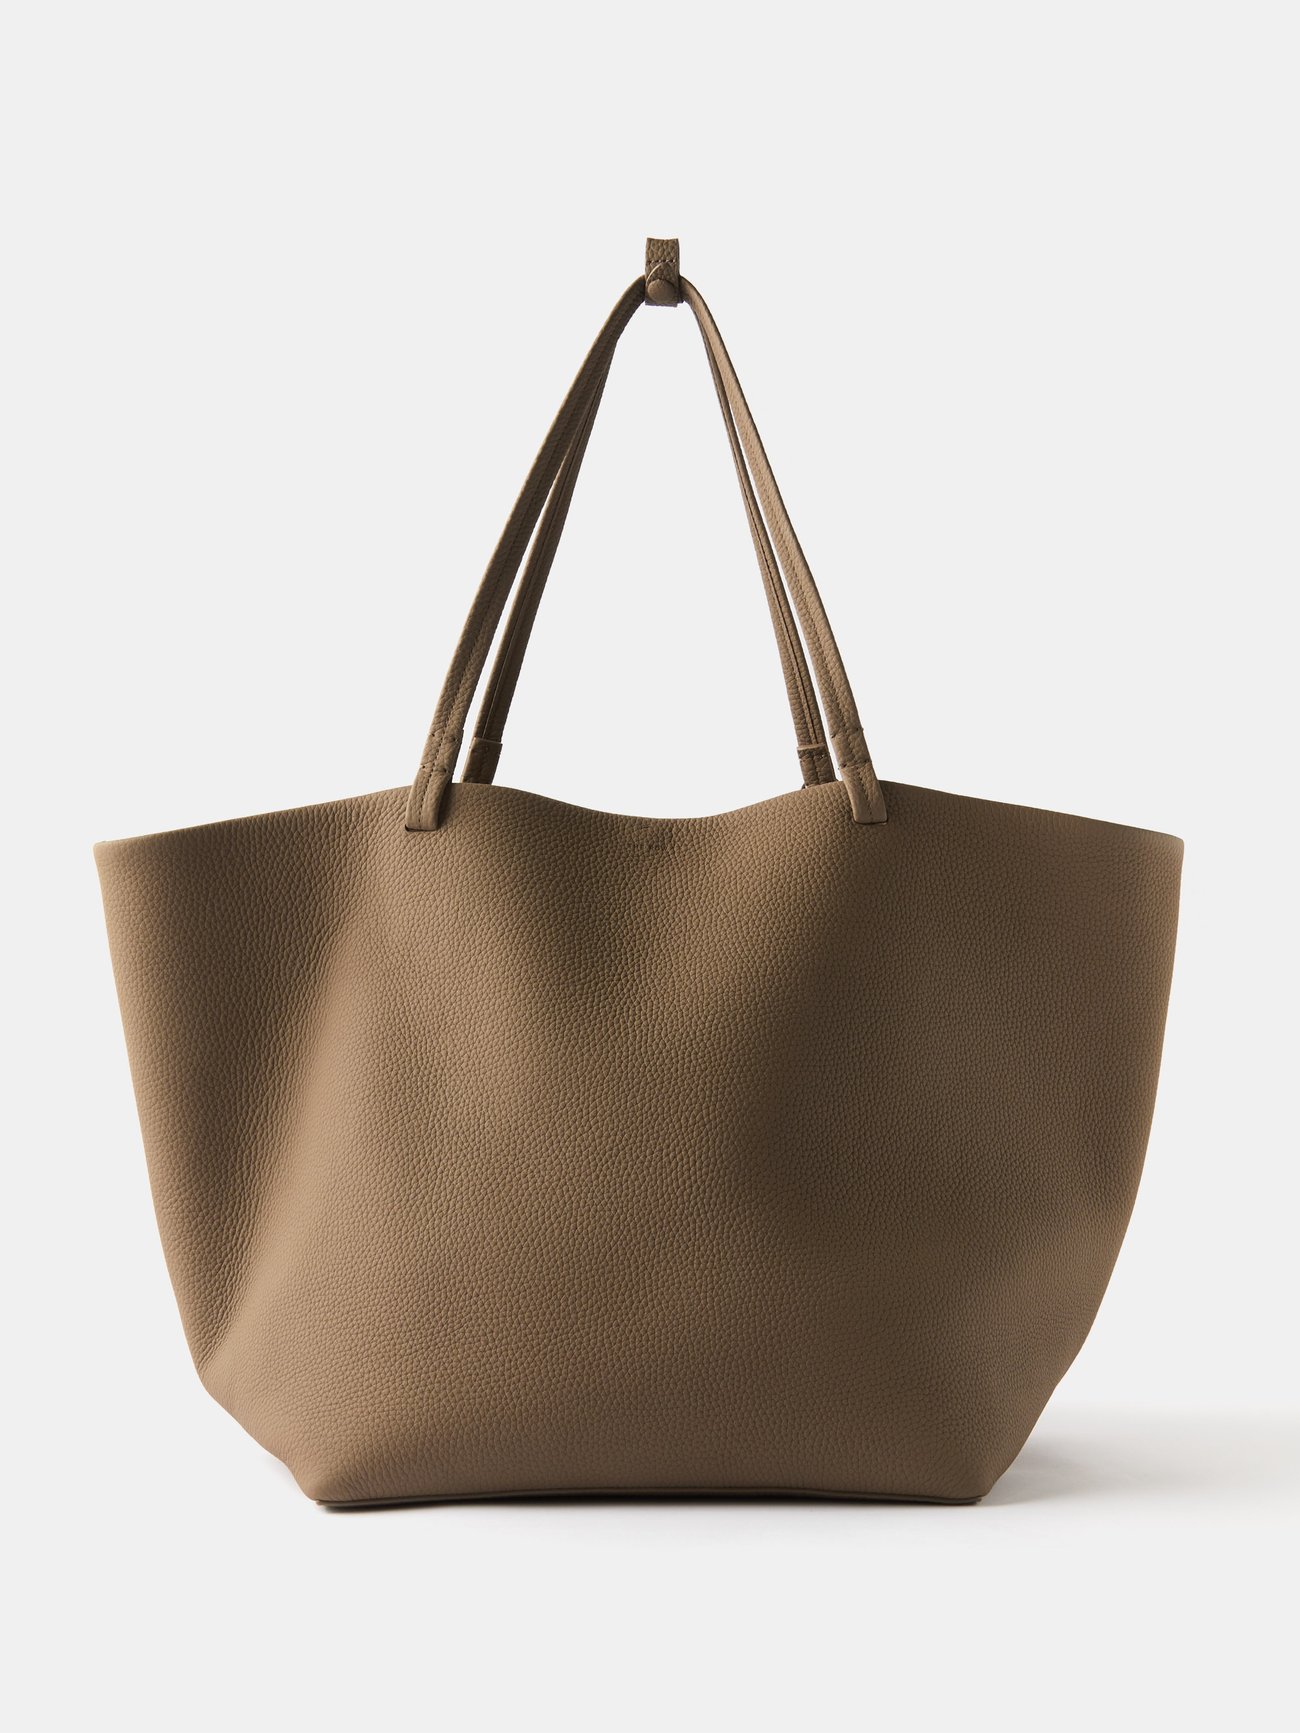 Women's Grained Leather Large Park Tote Bag by The Row